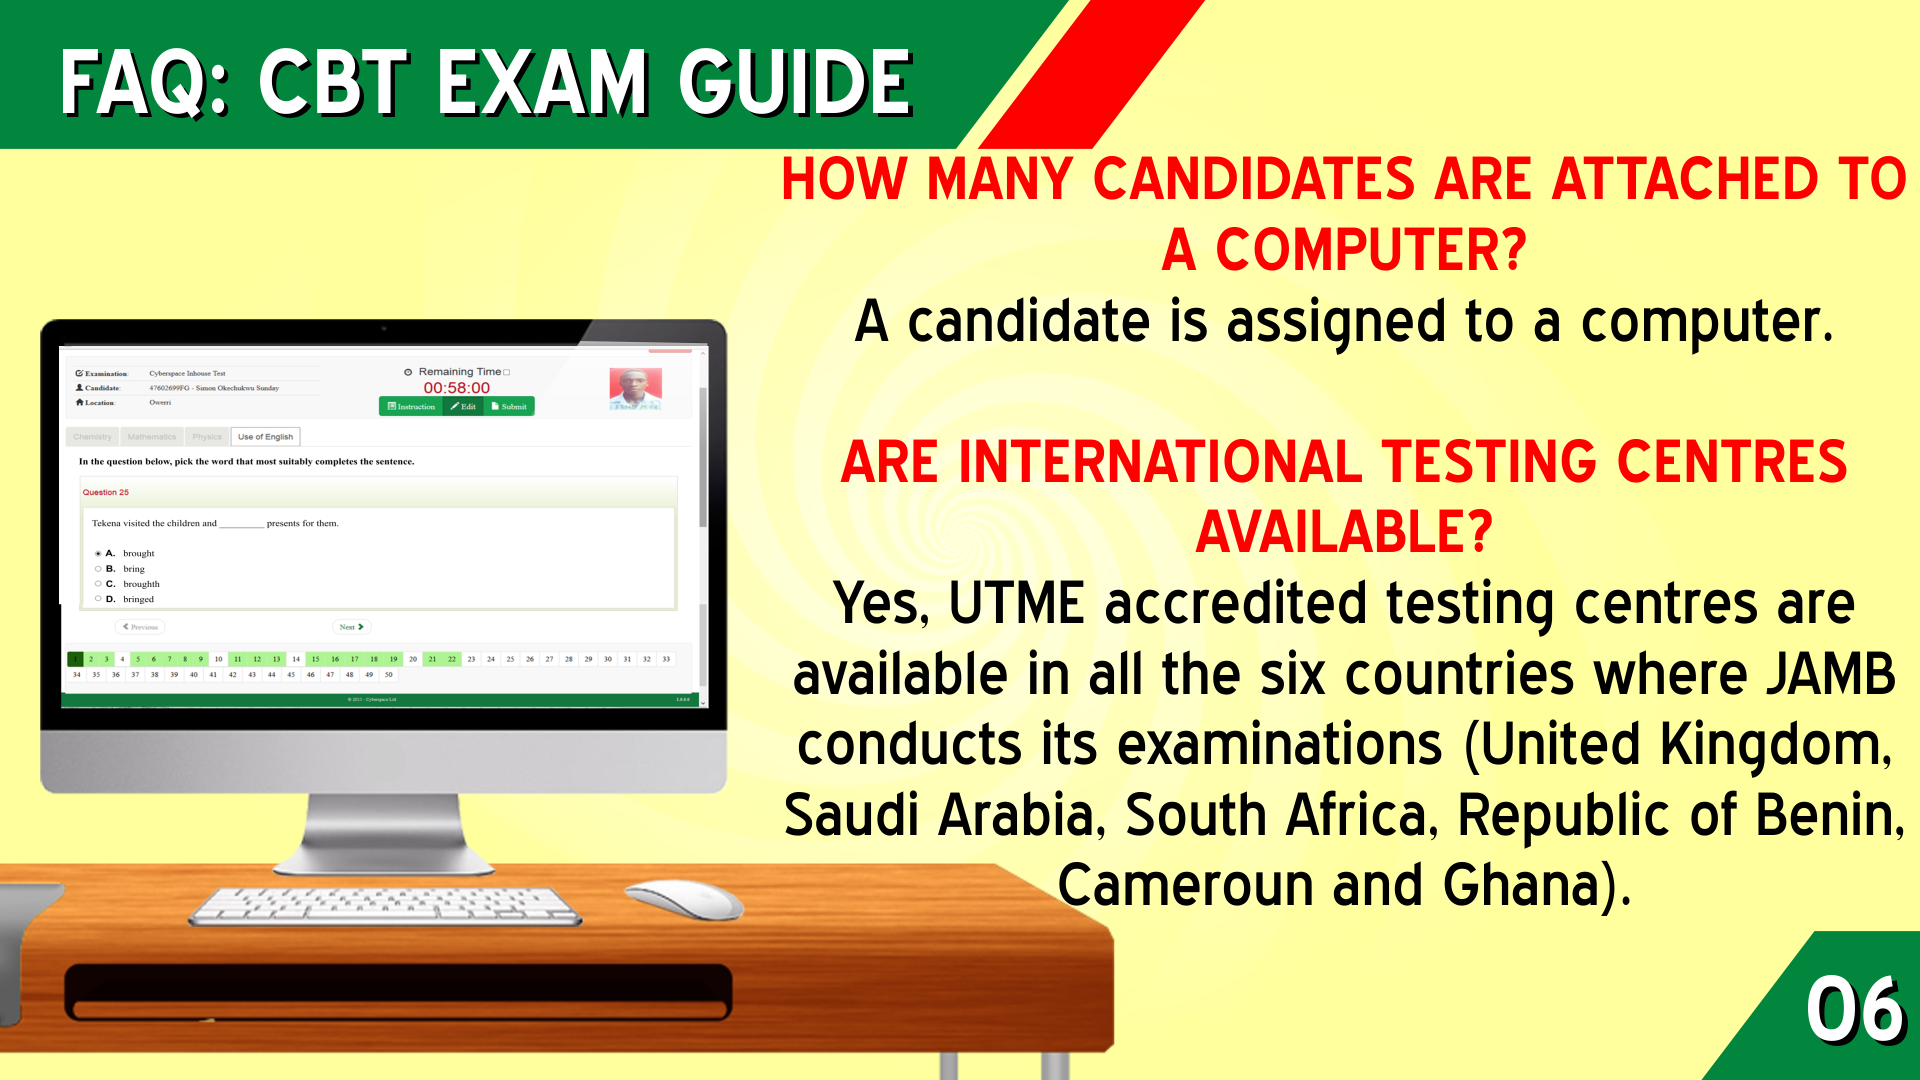 ARE INTERNATIONAL JAMB TESTING CENTRES AVAILABLE?